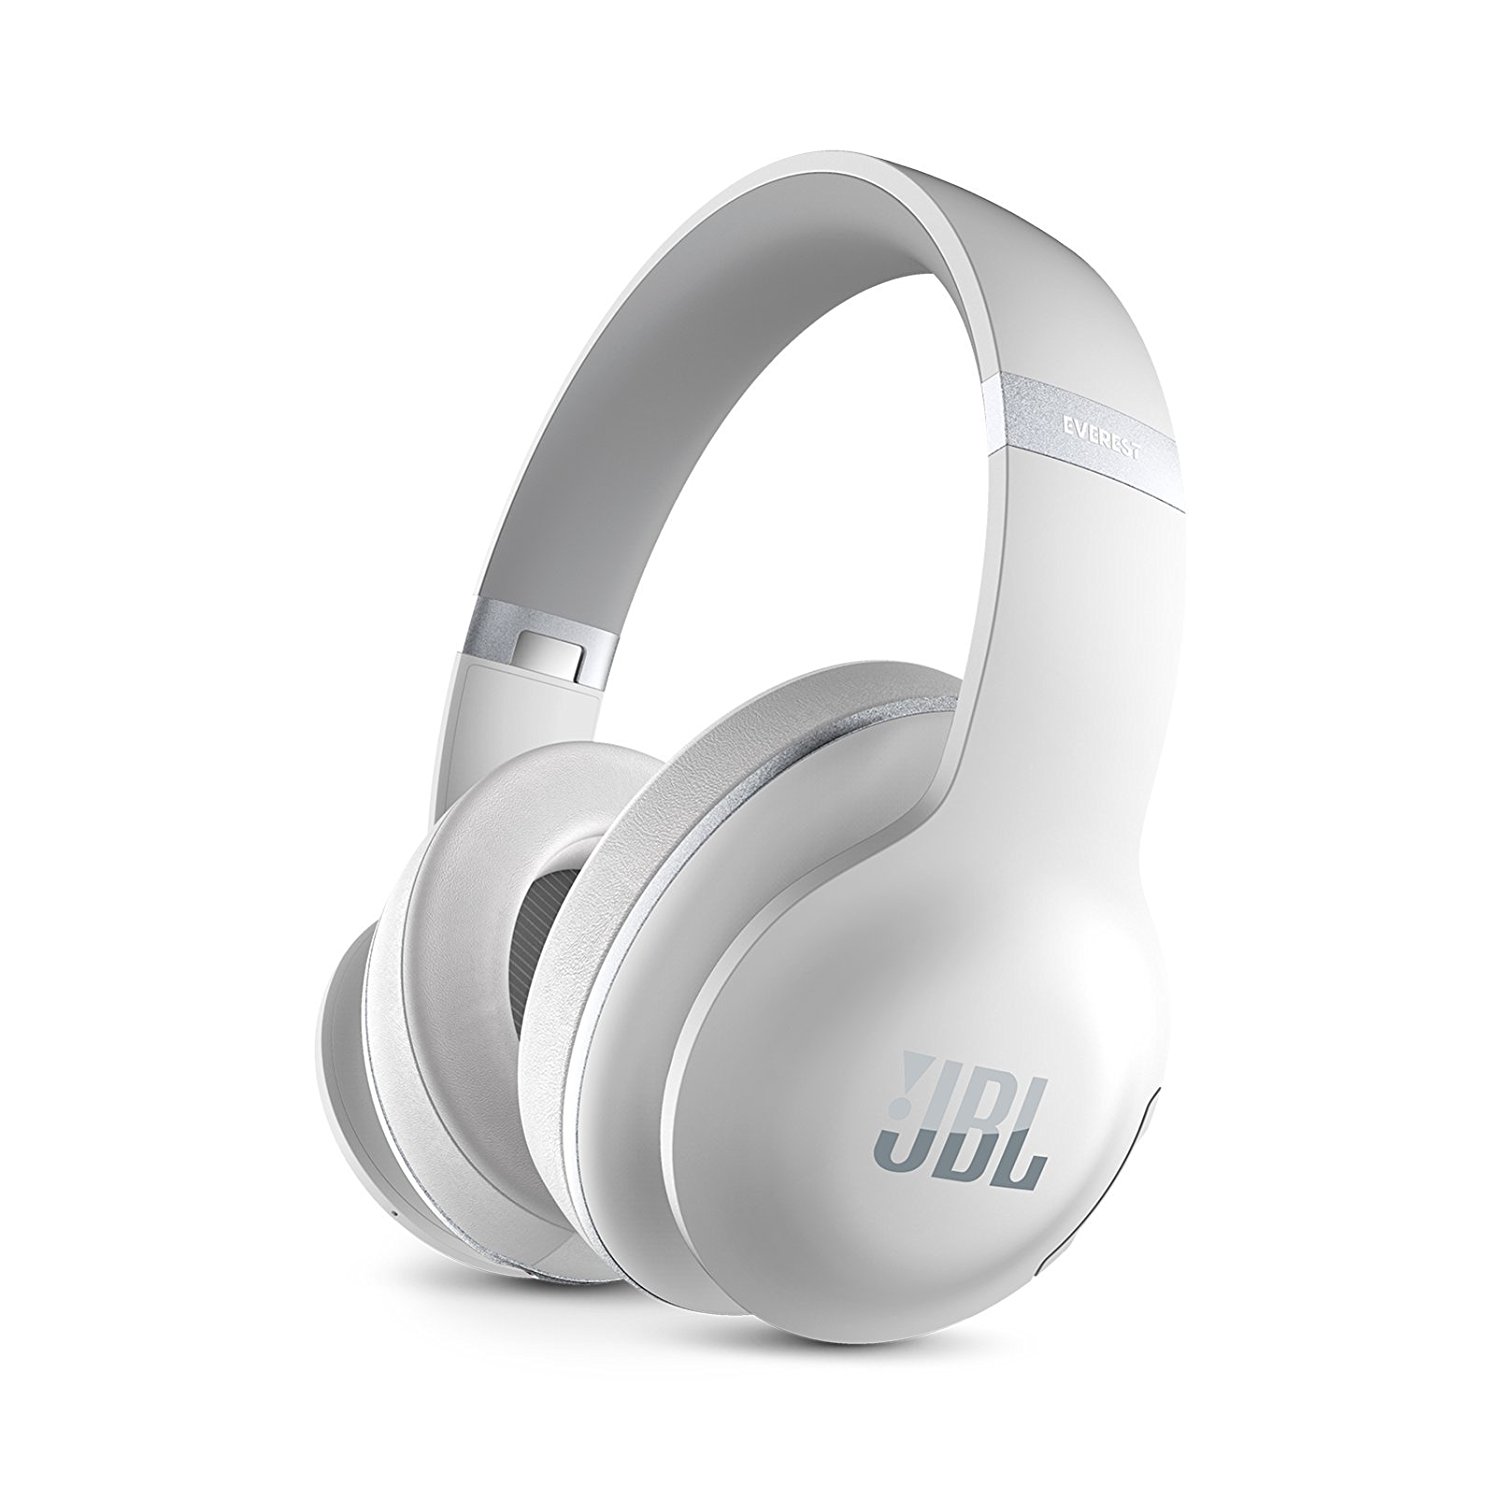 While supplies last: Refurbished JBL noise-canceling Bluetooth headphones for $130